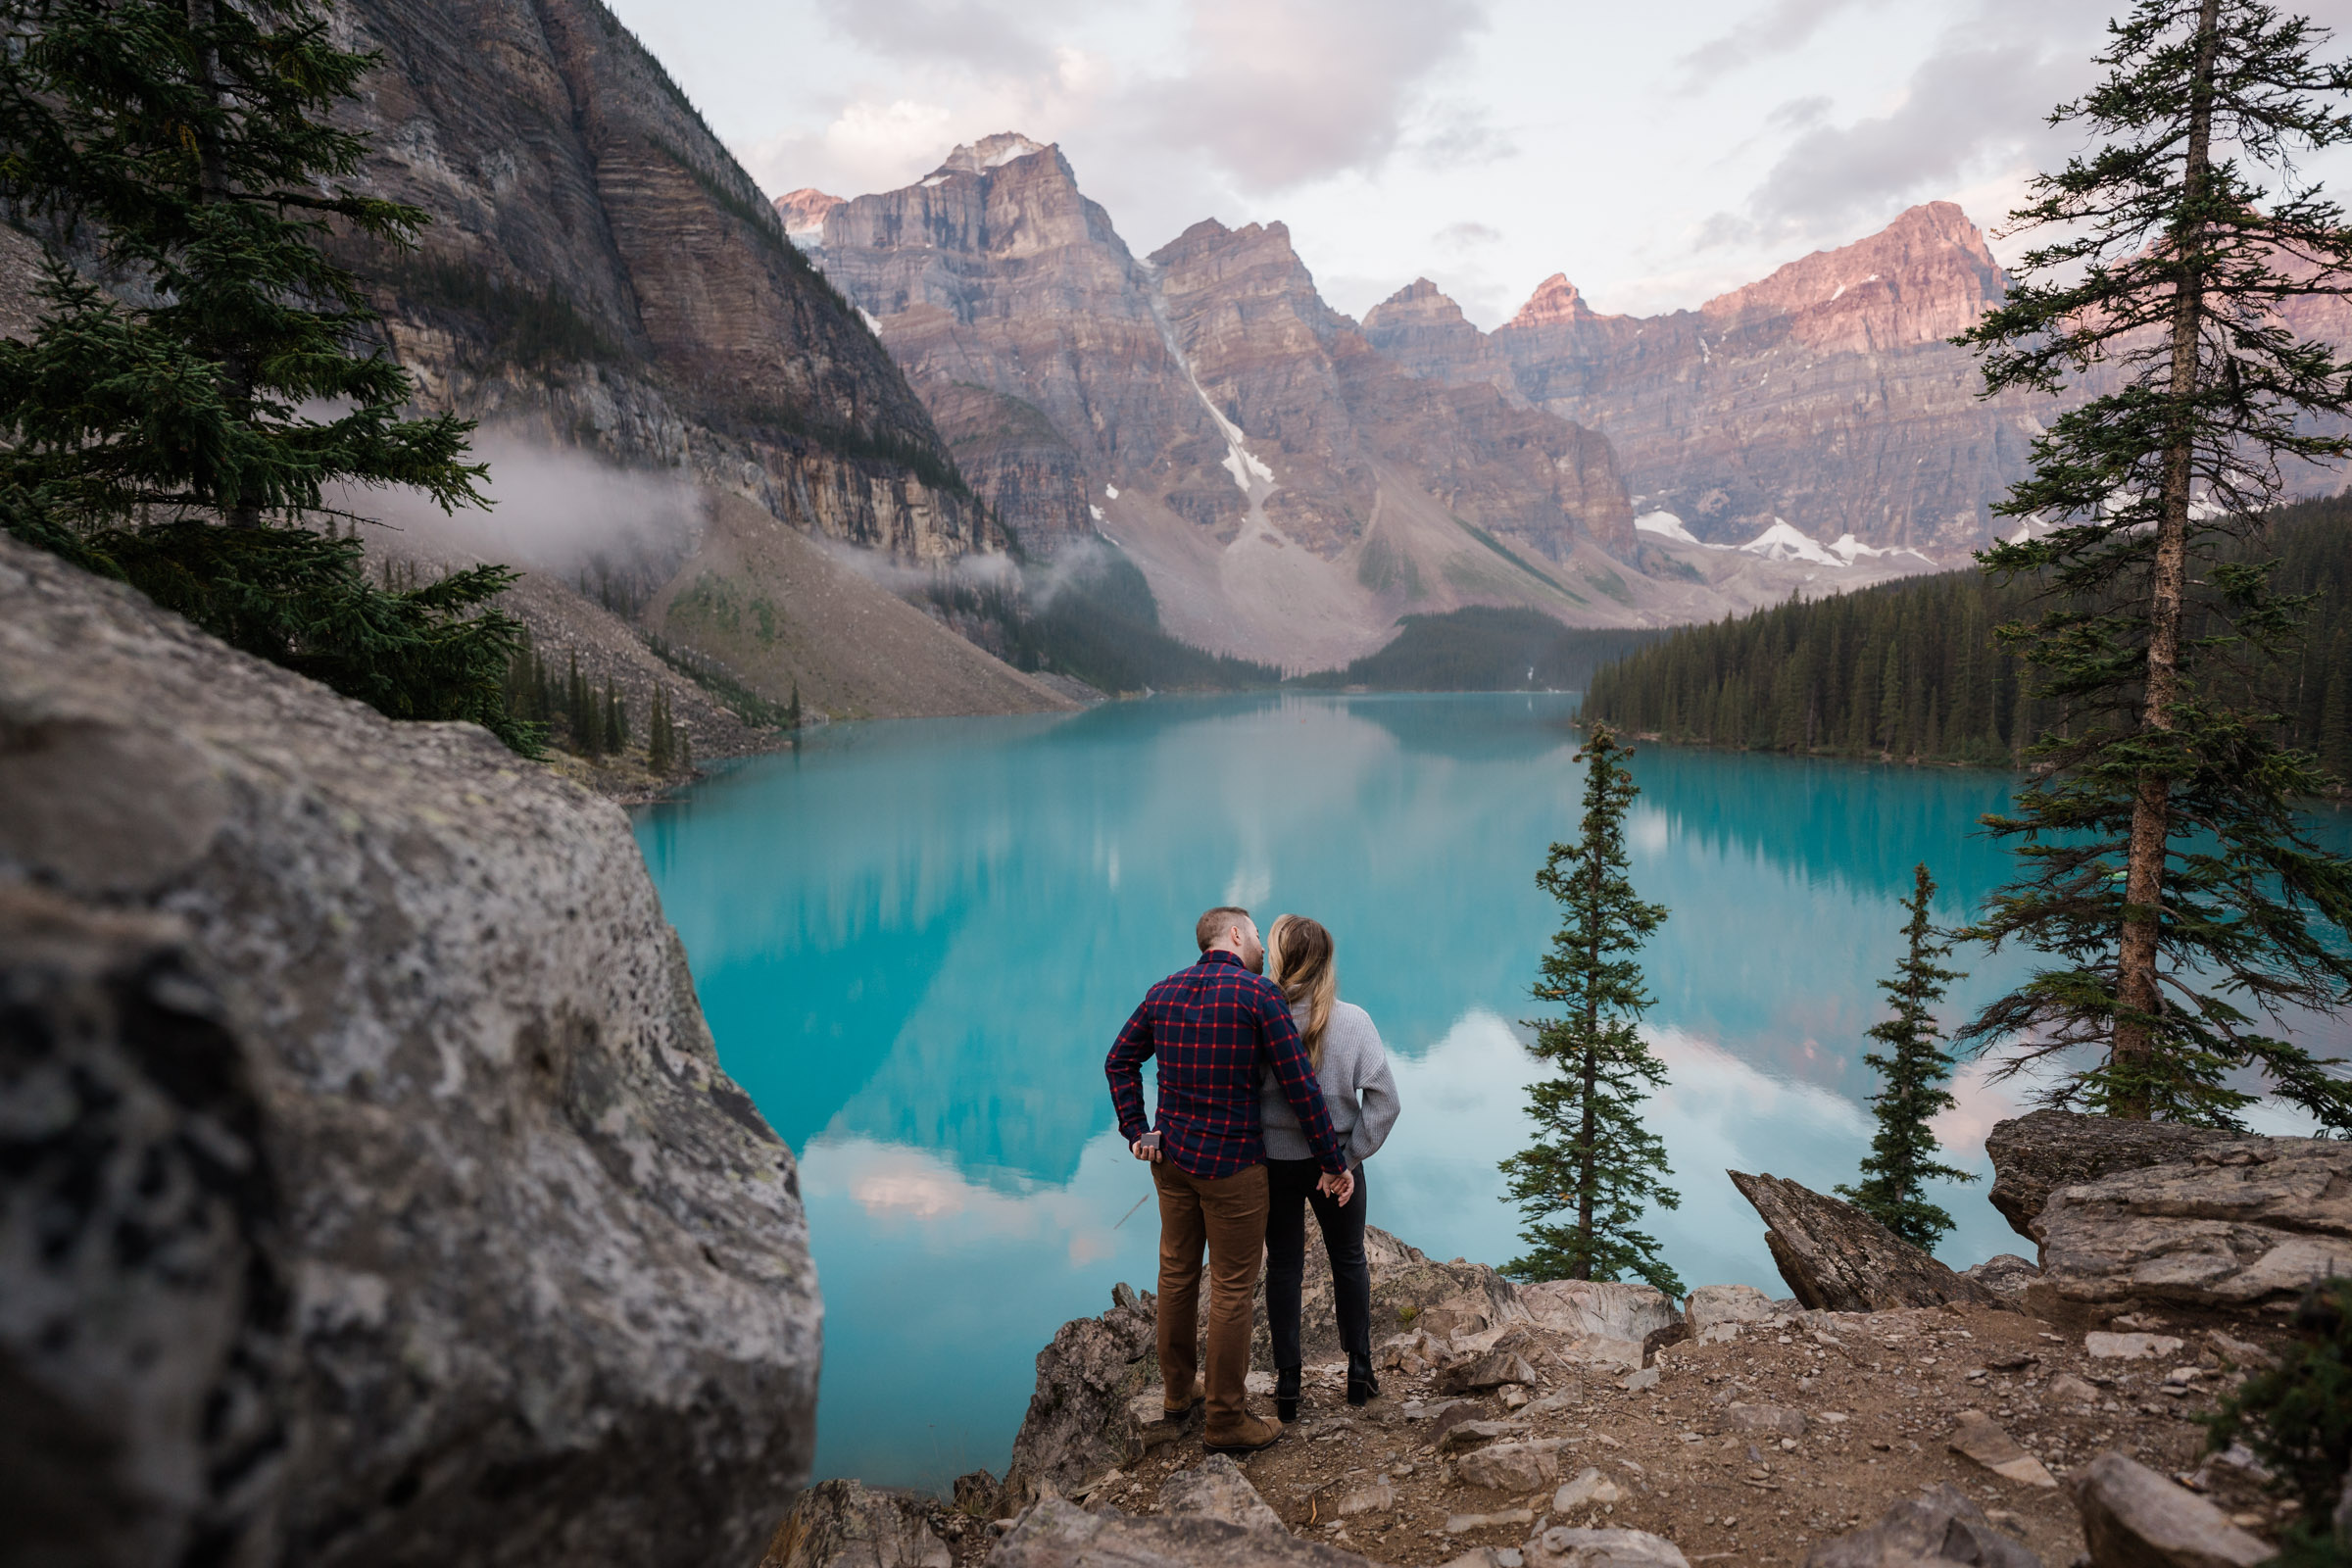 Couple kisses in front of Moraine Lake while he holds a hidden ring box behind his back